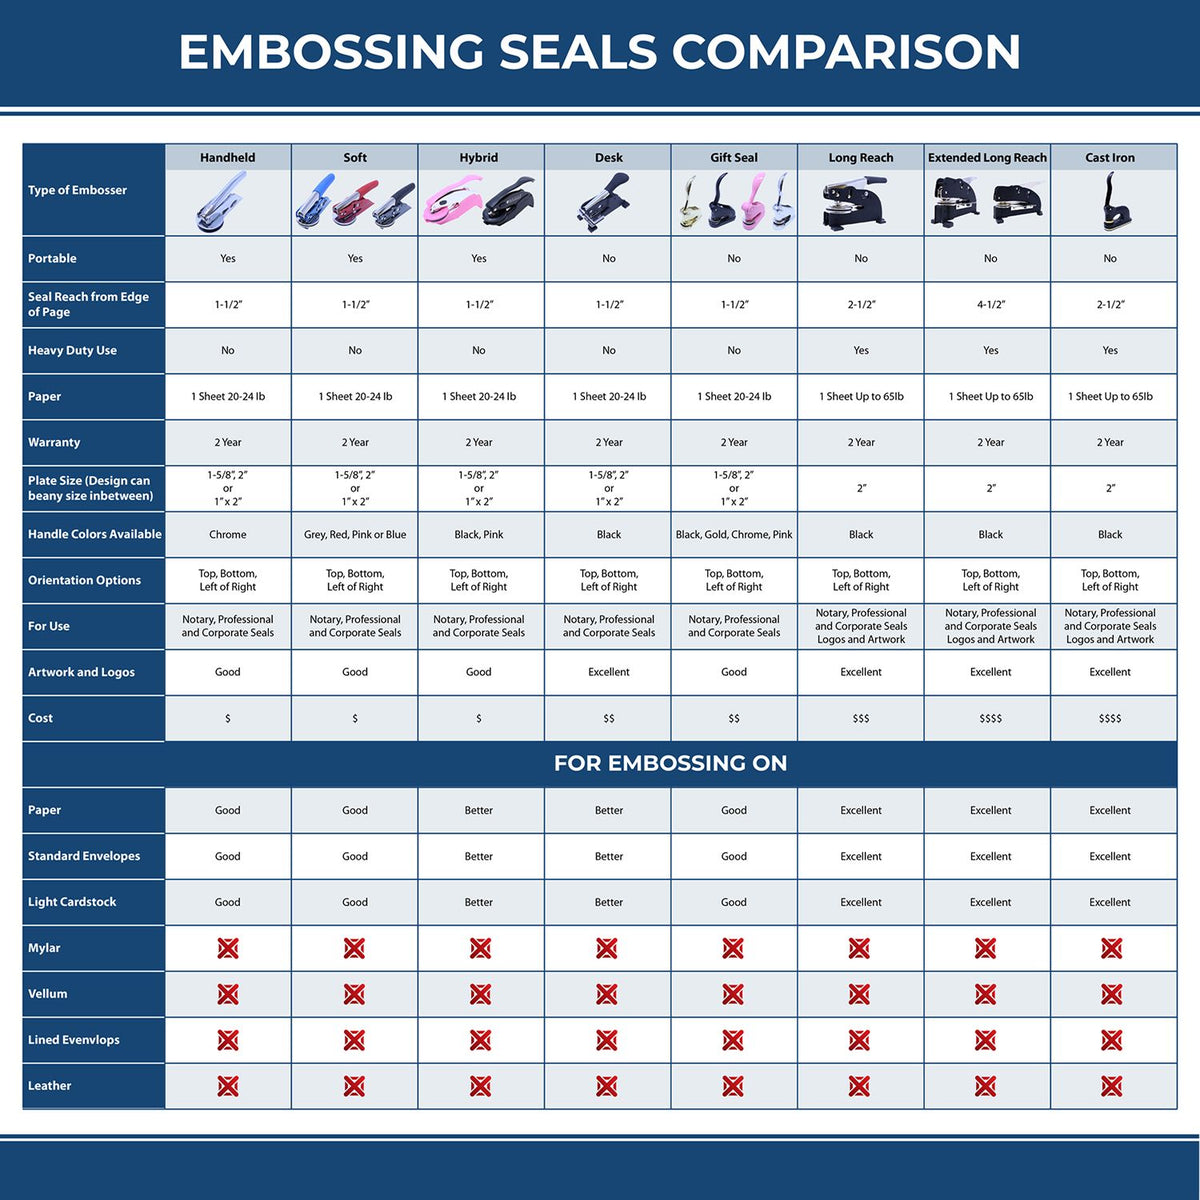 A comparison chart for the different types of mount models available for the Handheld Michigan Land Surveyor Seal.